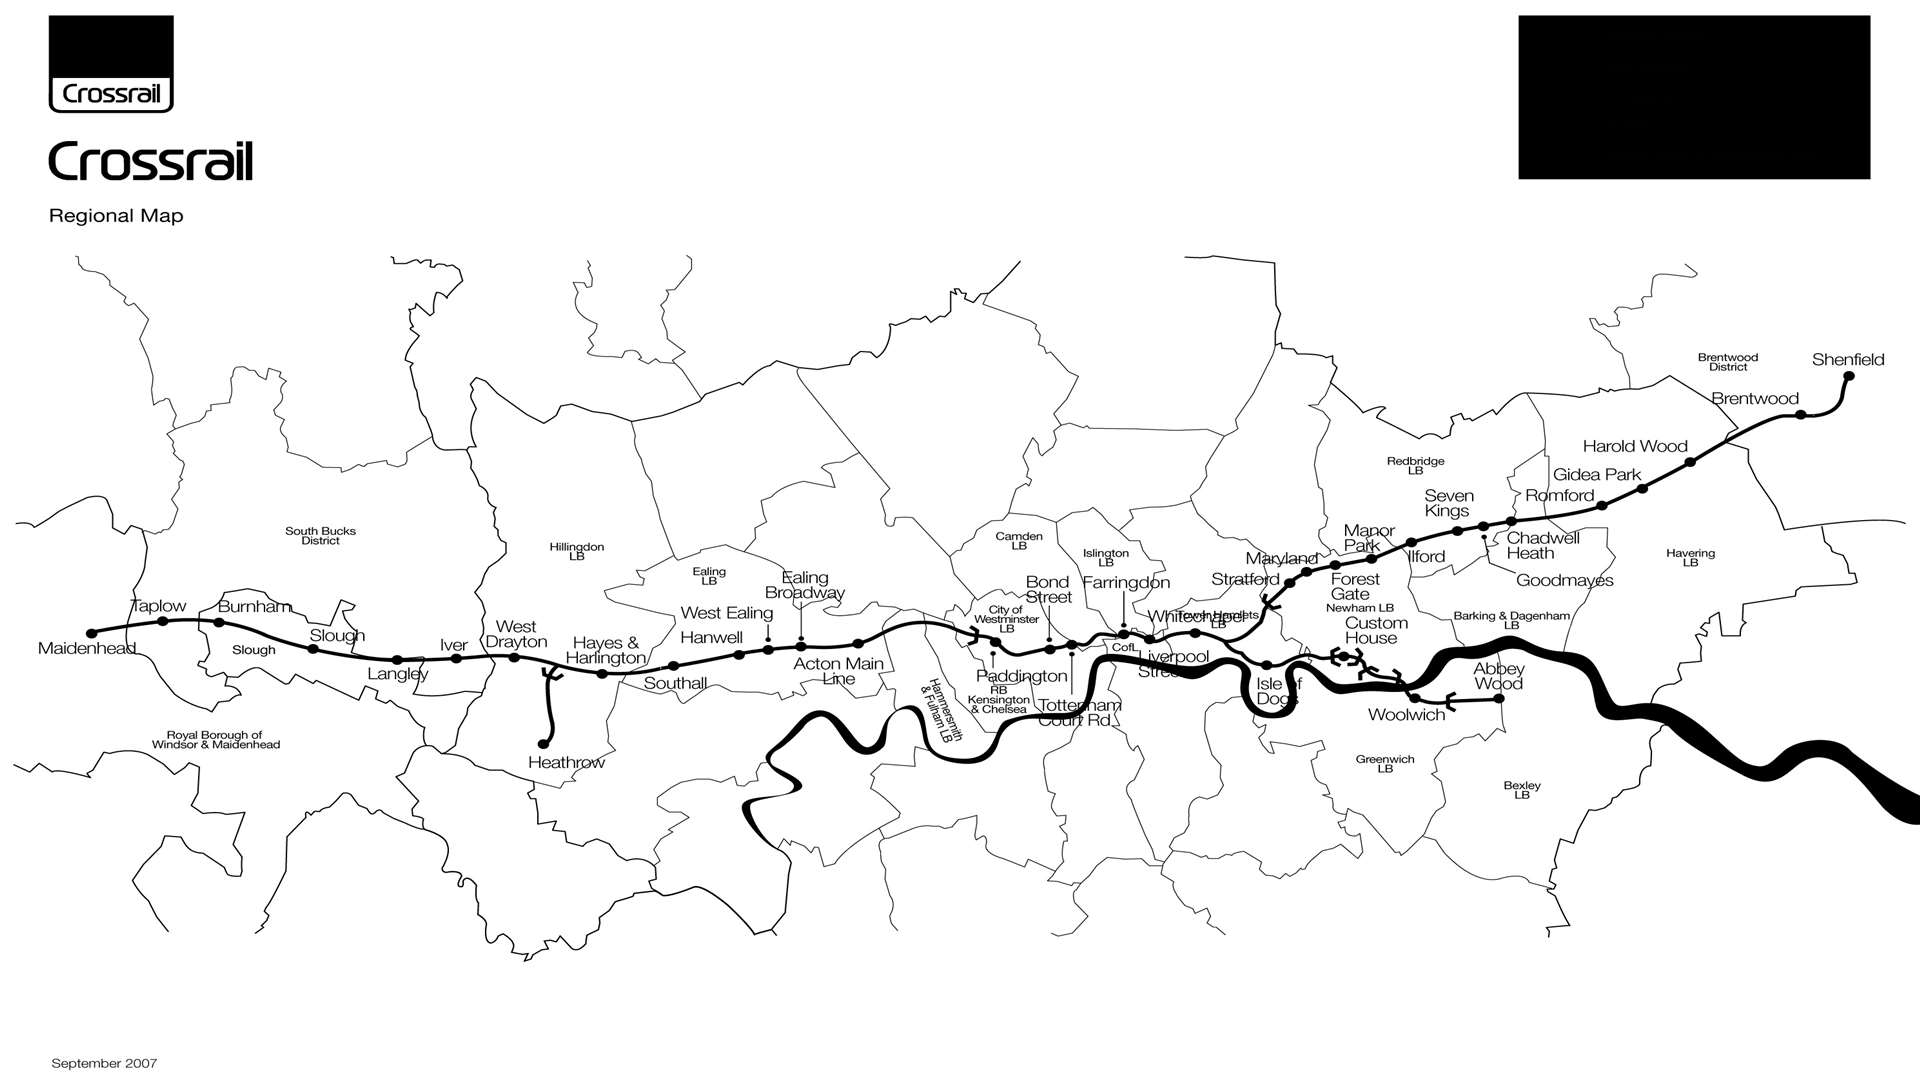 Crossrail is currently only due to reach Abbey Wood